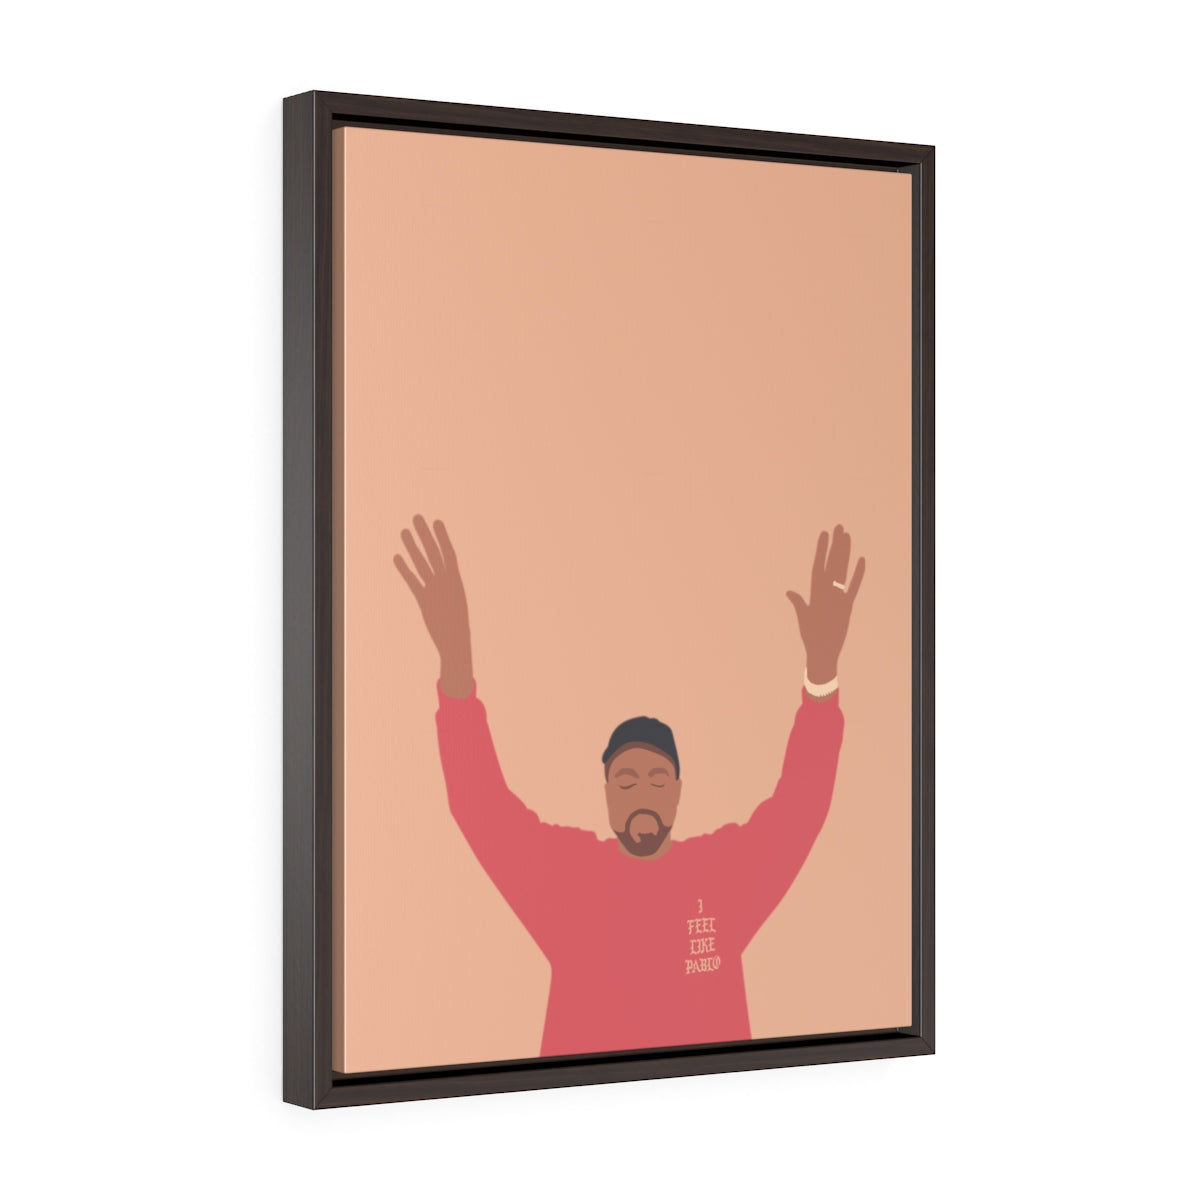 Kanye West I Feel Like Pablo Framed Premium Gallery Wrap Canvas - The Life of Pablo TLOP tour merch inspired-18″ × 24″-Premium Gallery Wraps (1.25″)-Walnut-Archethype